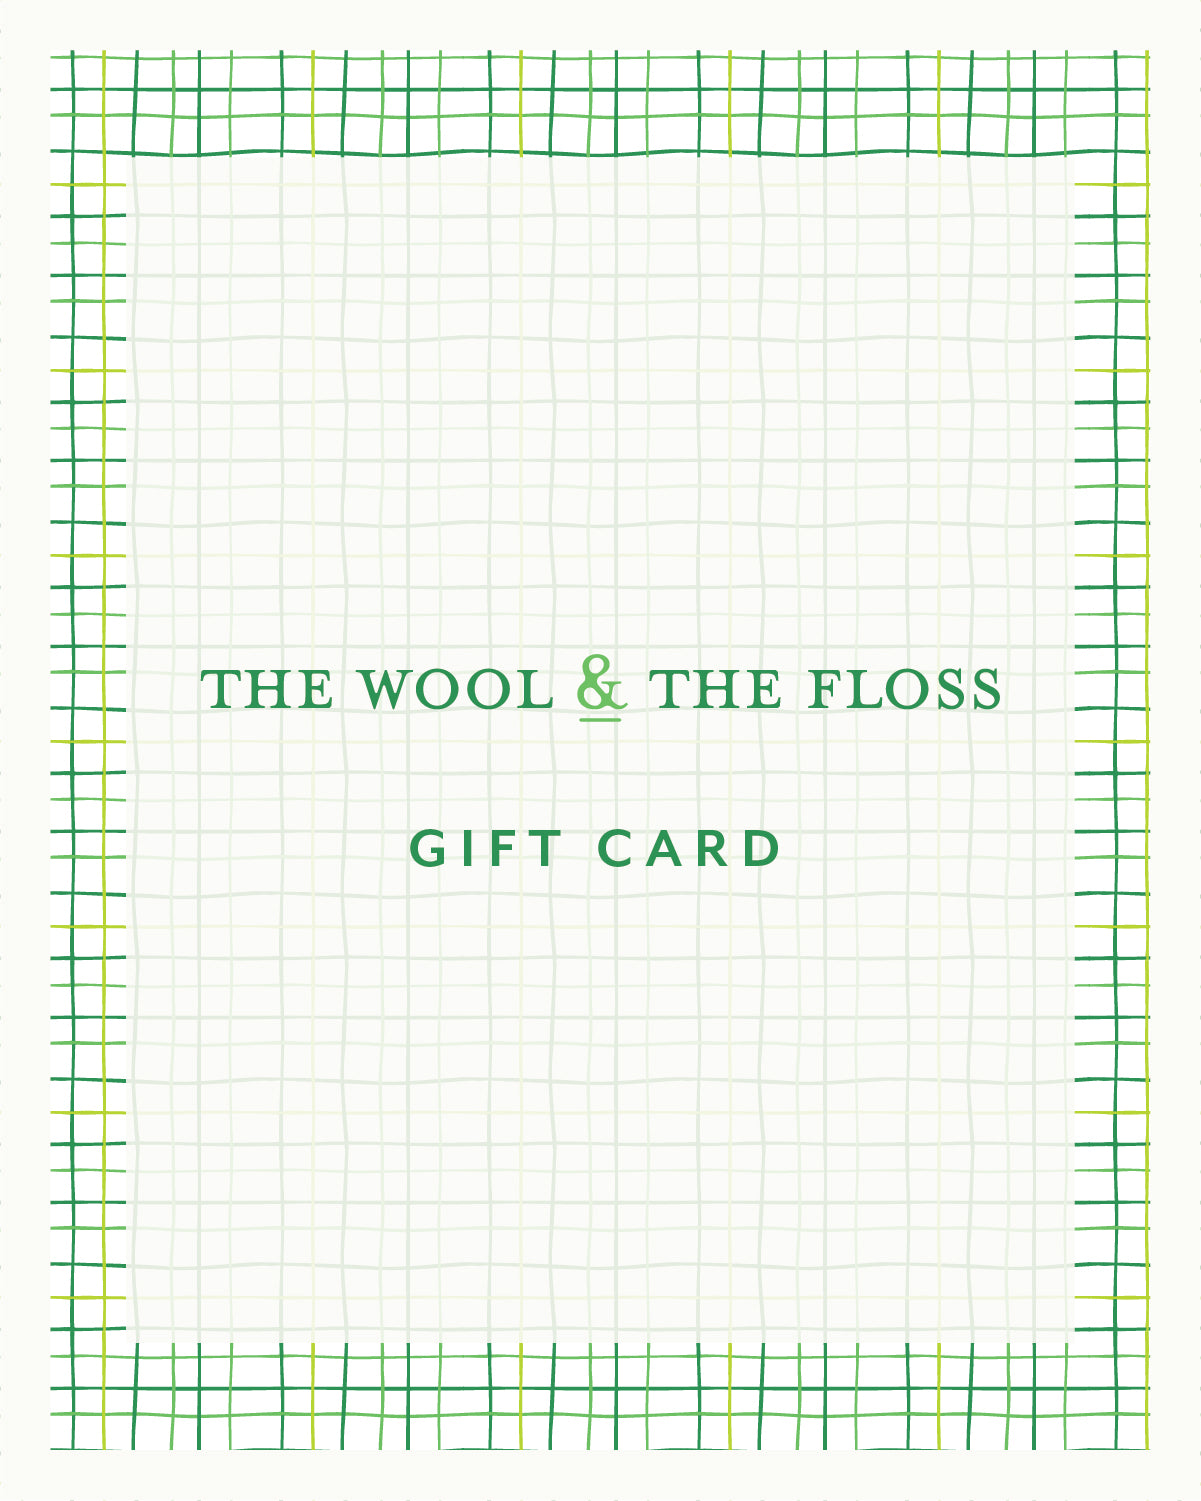 The Wool & the Floss Gift Card